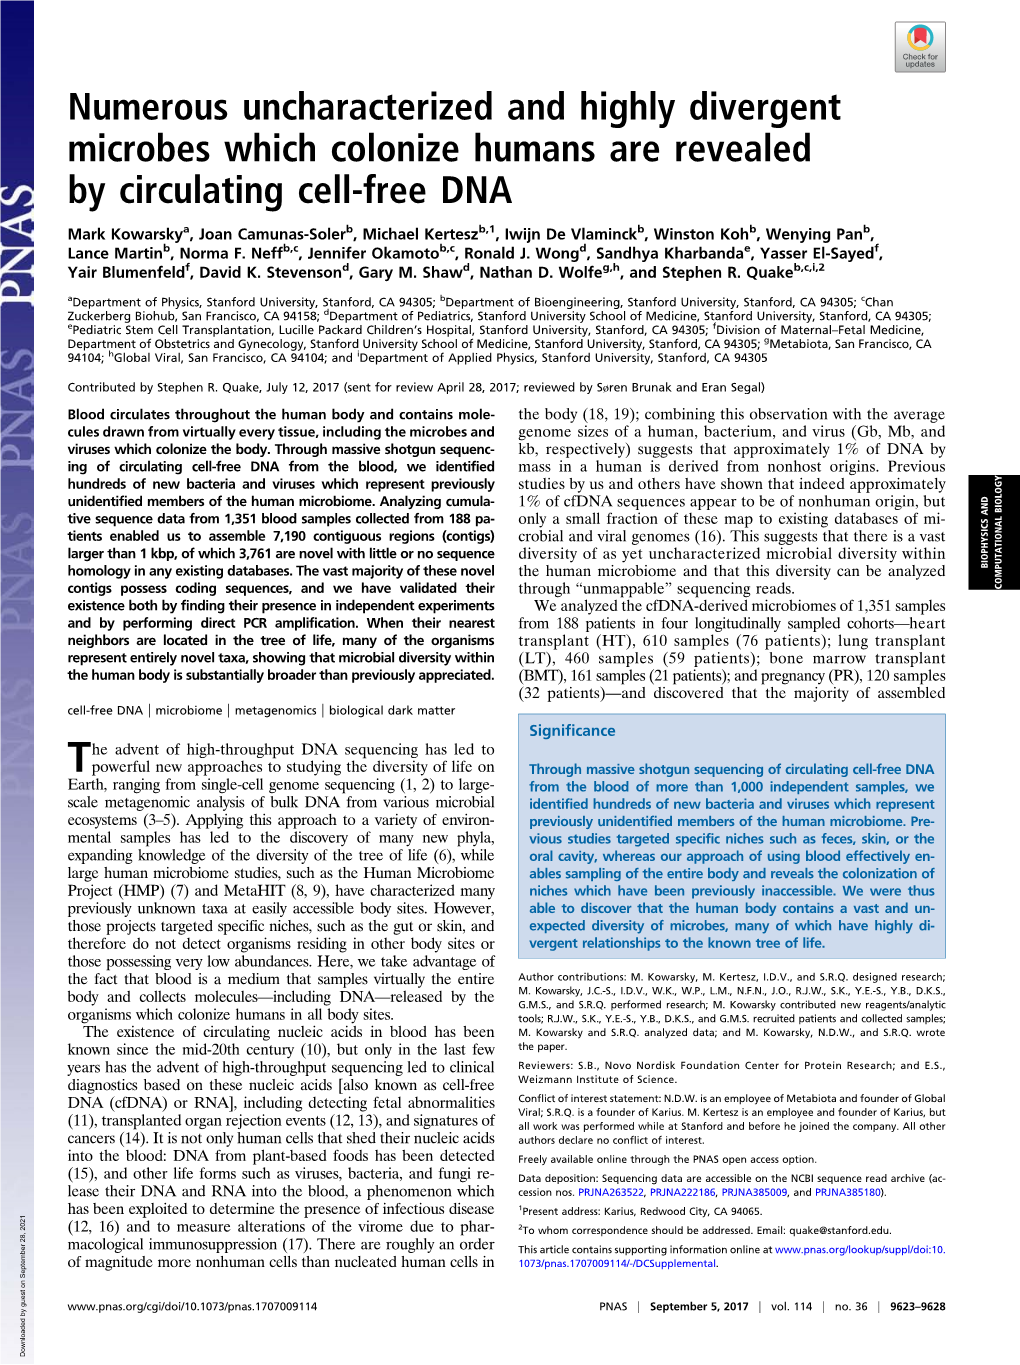 Numerous Uncharacterized and Highly Divergent Microbes Which Colonize Humans Are Revealed by Circulating Cell-Free DNA